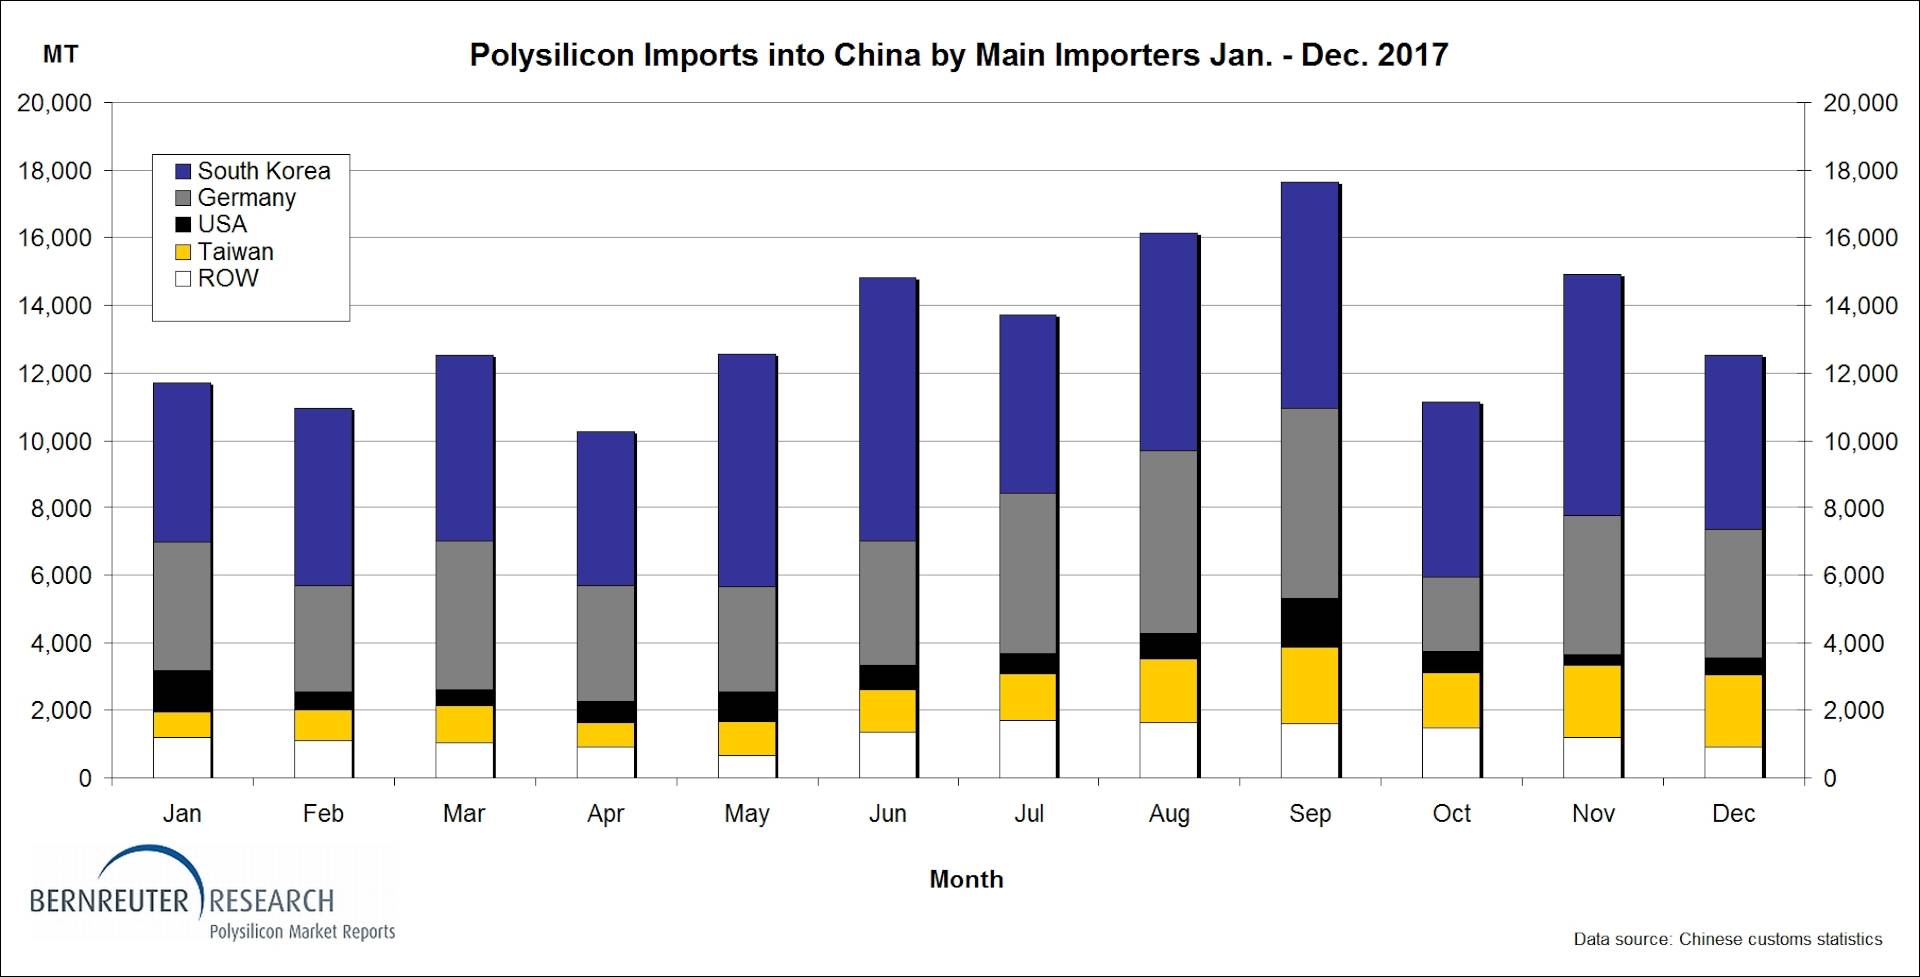 Monthly polysilicon imports into China from January through December 2017